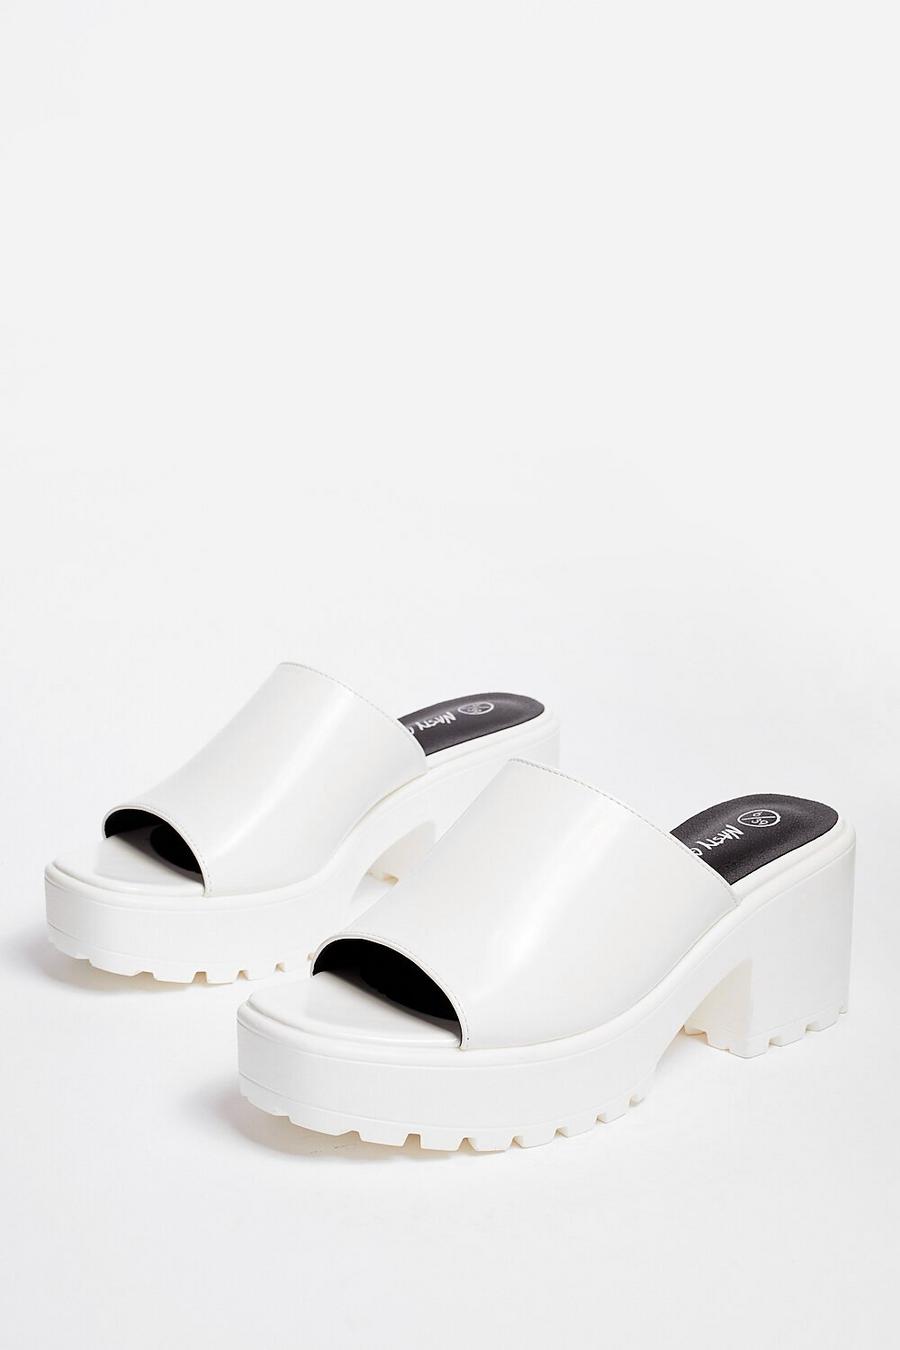 Chunky White Buckle Platform Slip On Sliders Sandals Strappy Wedge 